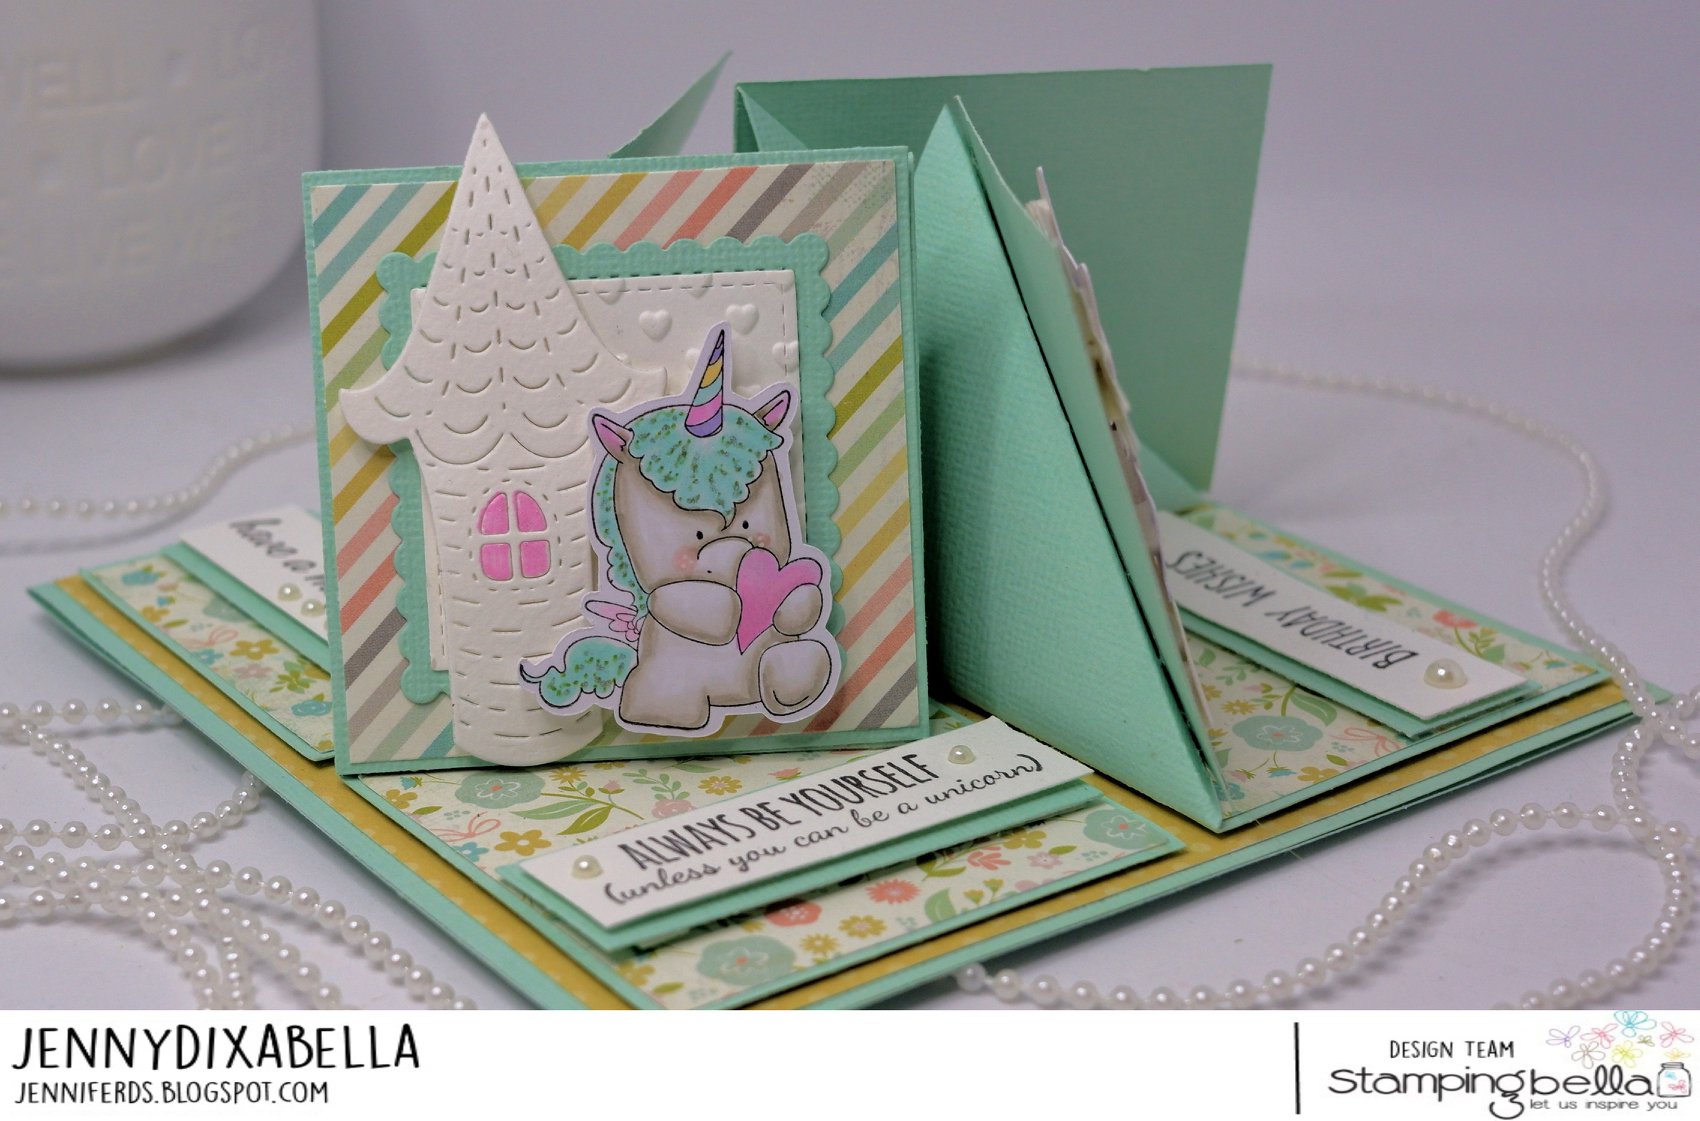 www.stampingbella.com: rubber stamps used: SET OF UNICORNS  Card by JENNY DIX